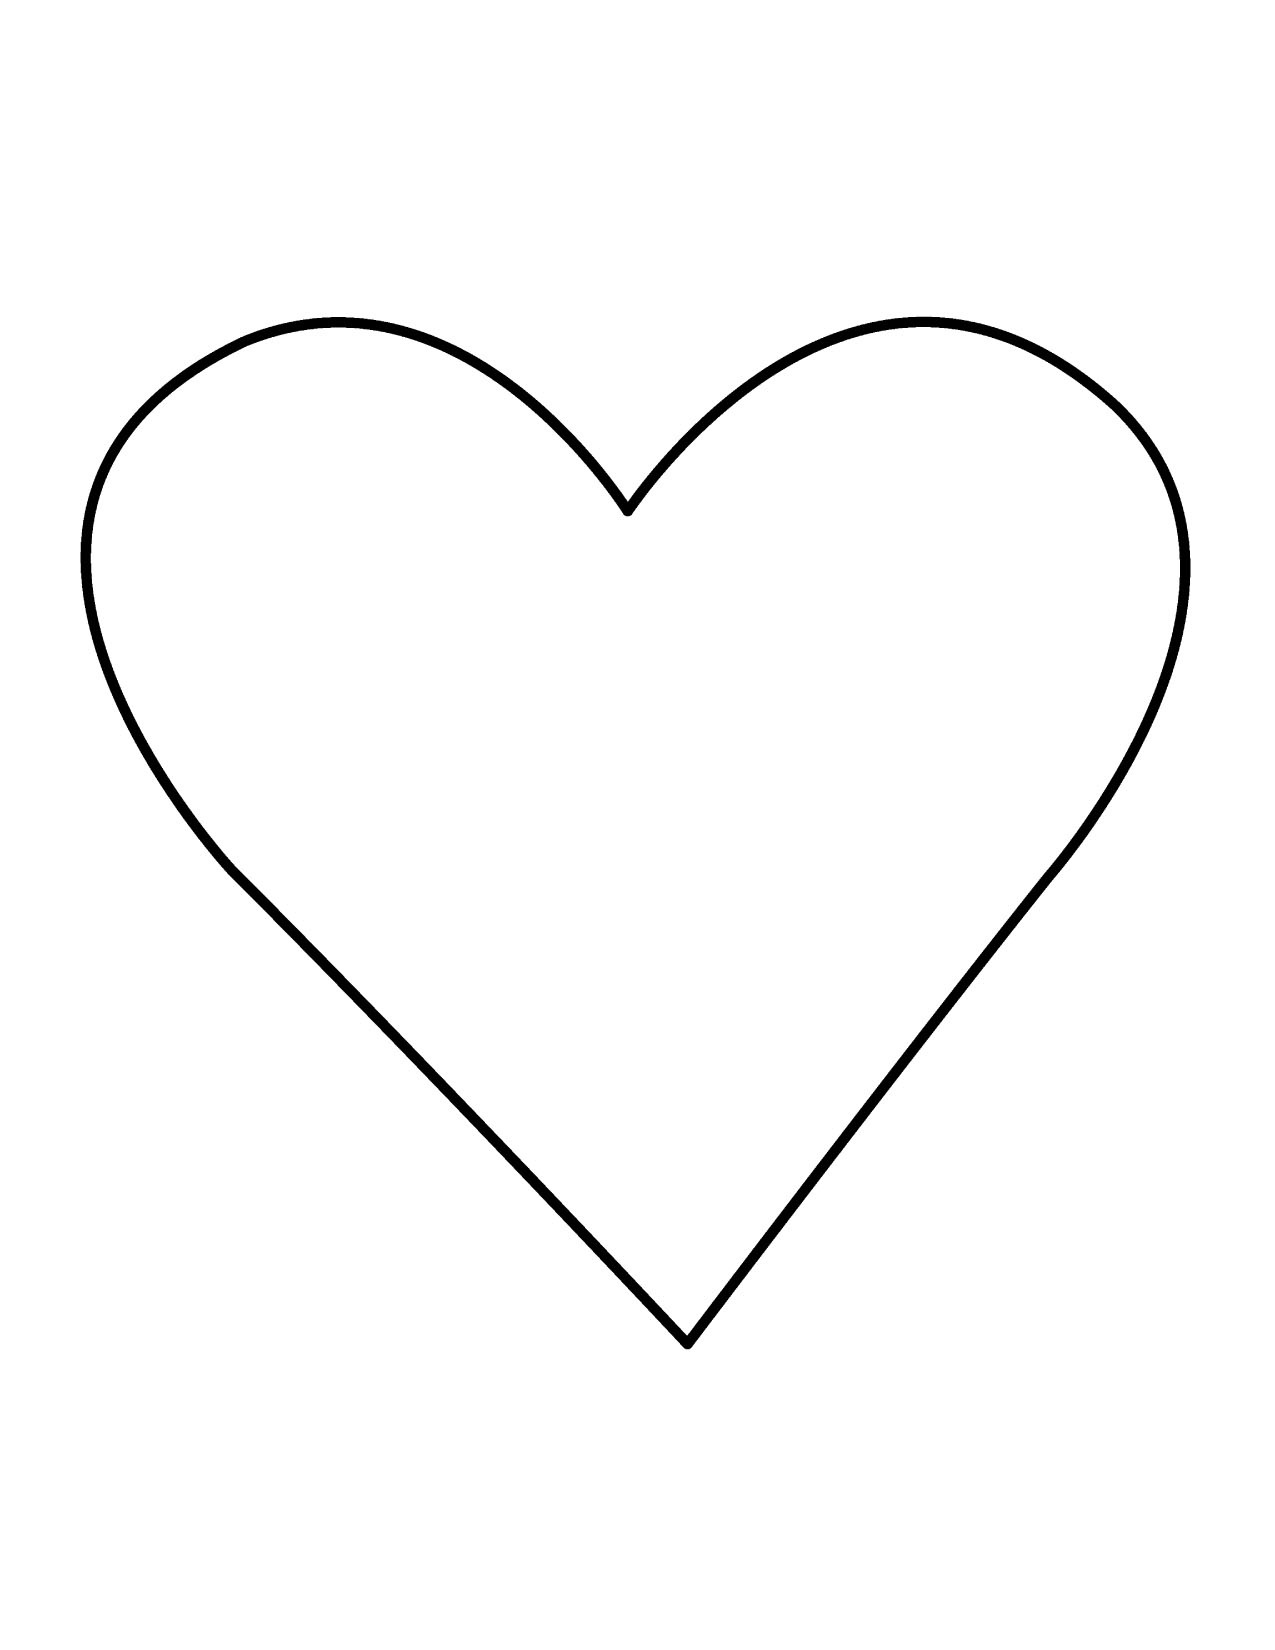 Heart Clipart Black And White.